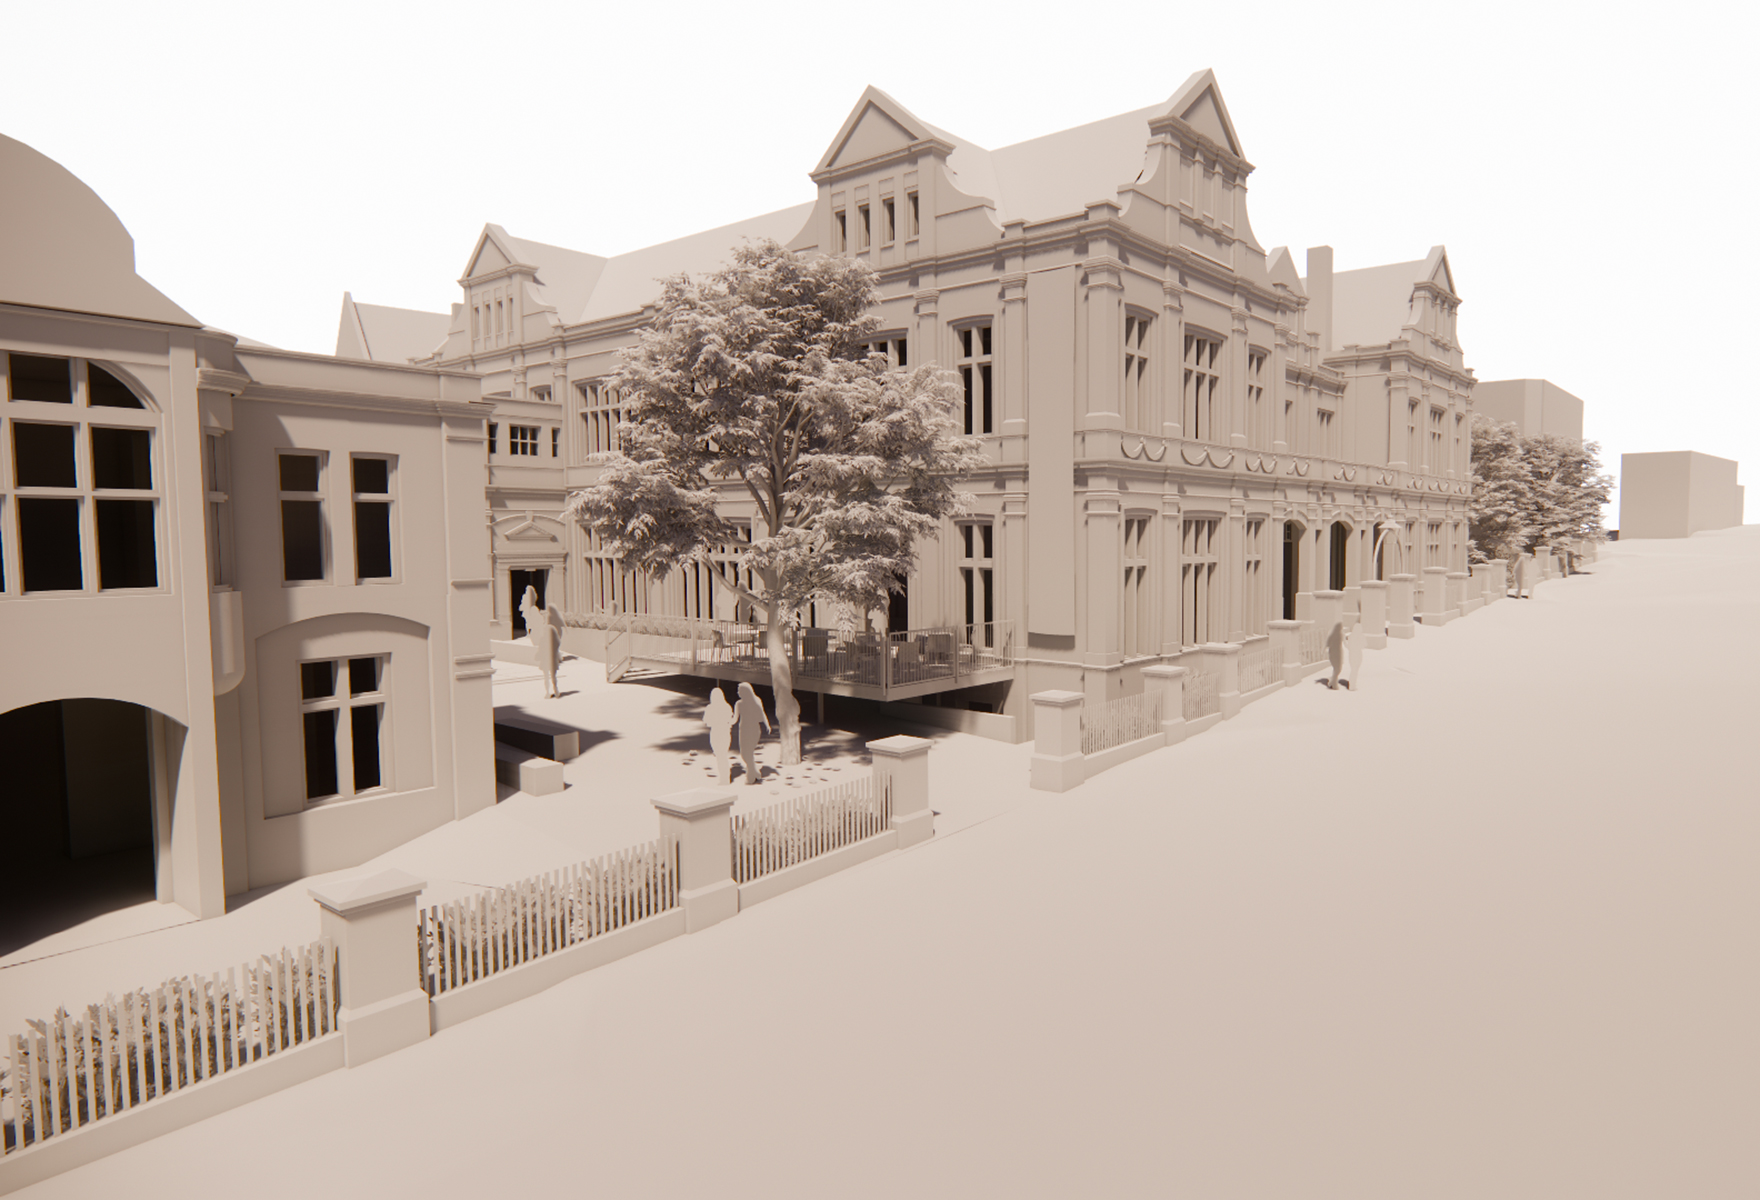 Ipswich Museum - Proposed High Street Approach